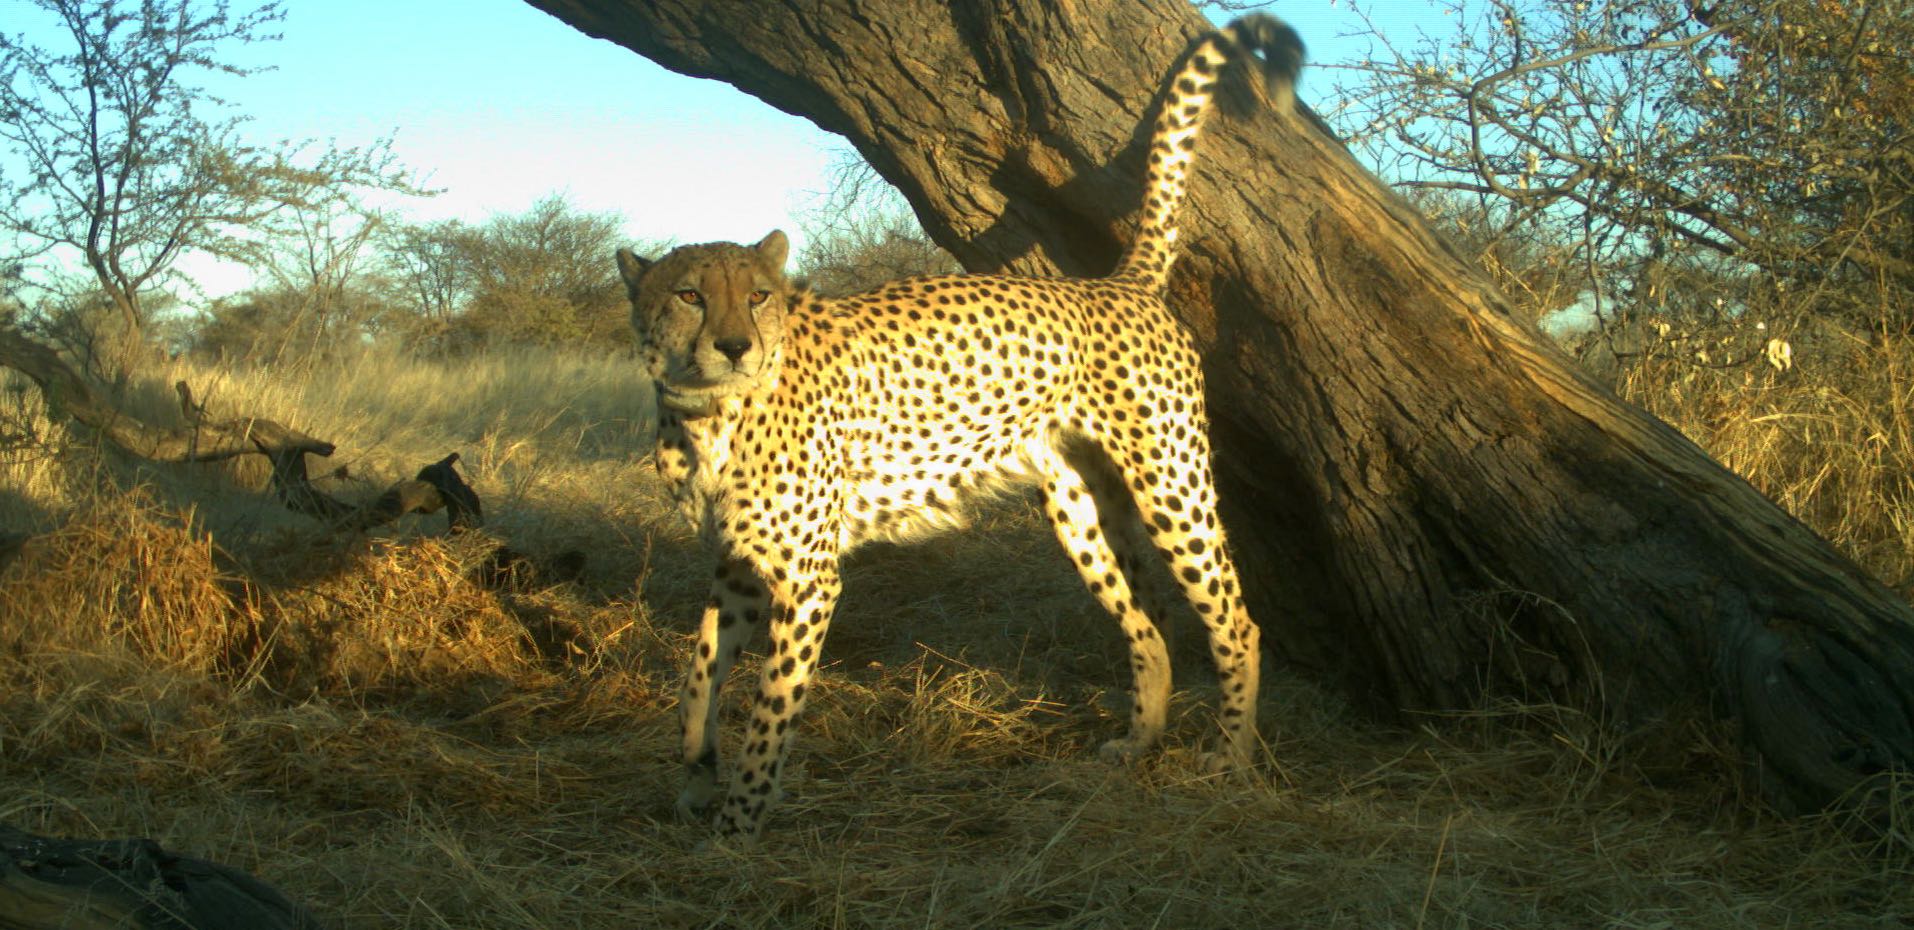 A cheetah under a tree with tail raised.